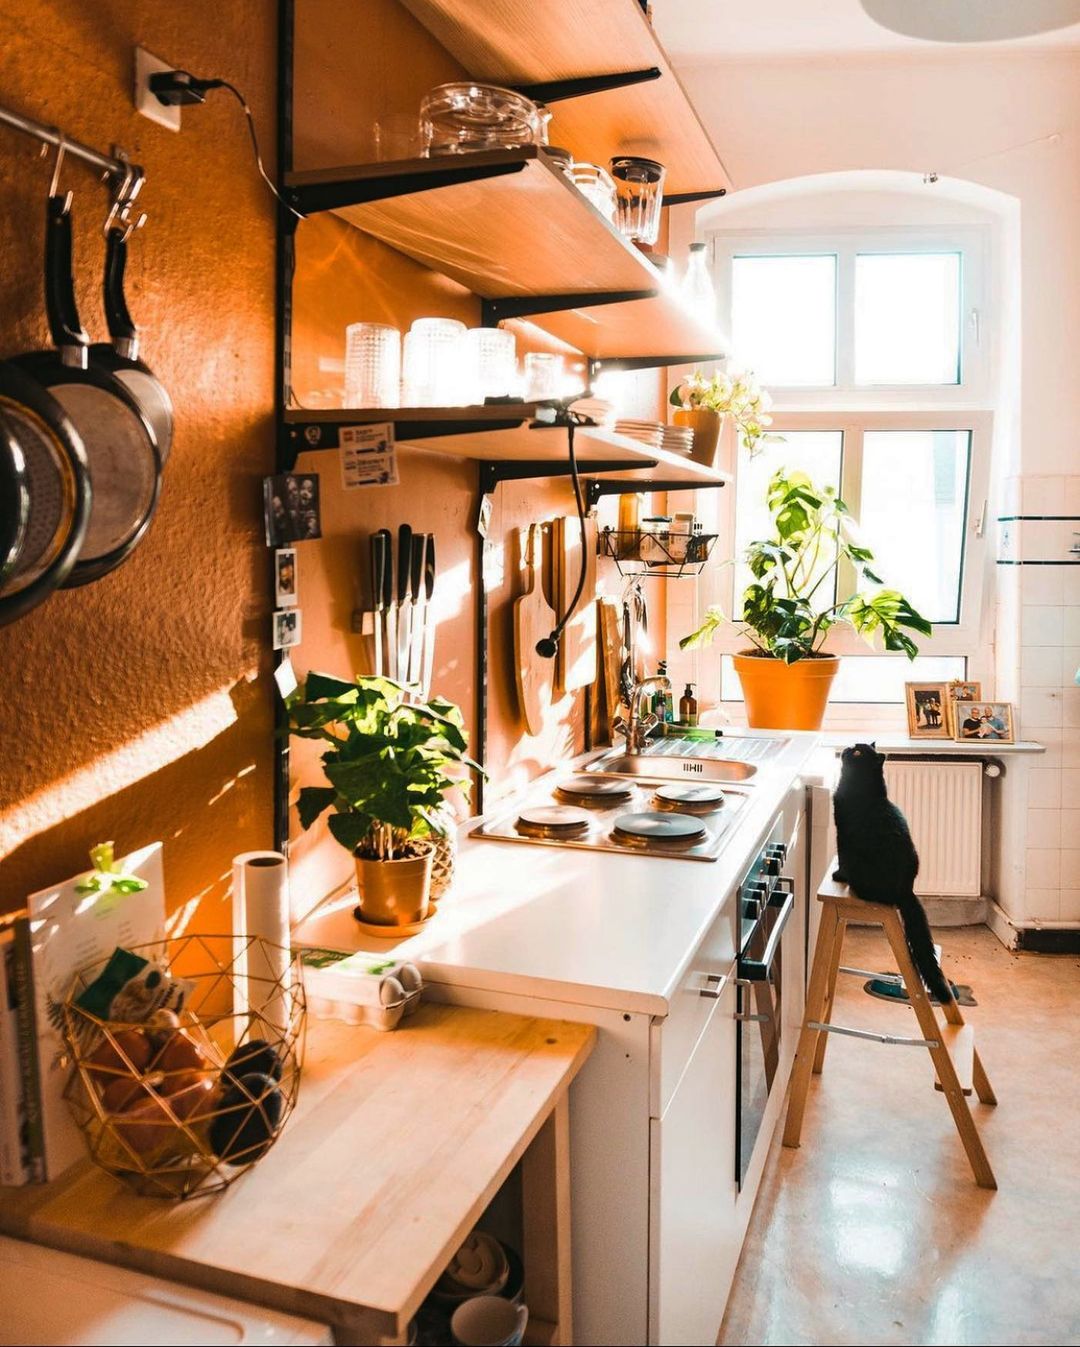 https://www.extraspace.com/blog/wp-content/uploads/2018/07/studio-apartment-storage-tips-make-the-most-of-vertical-space.jpeg